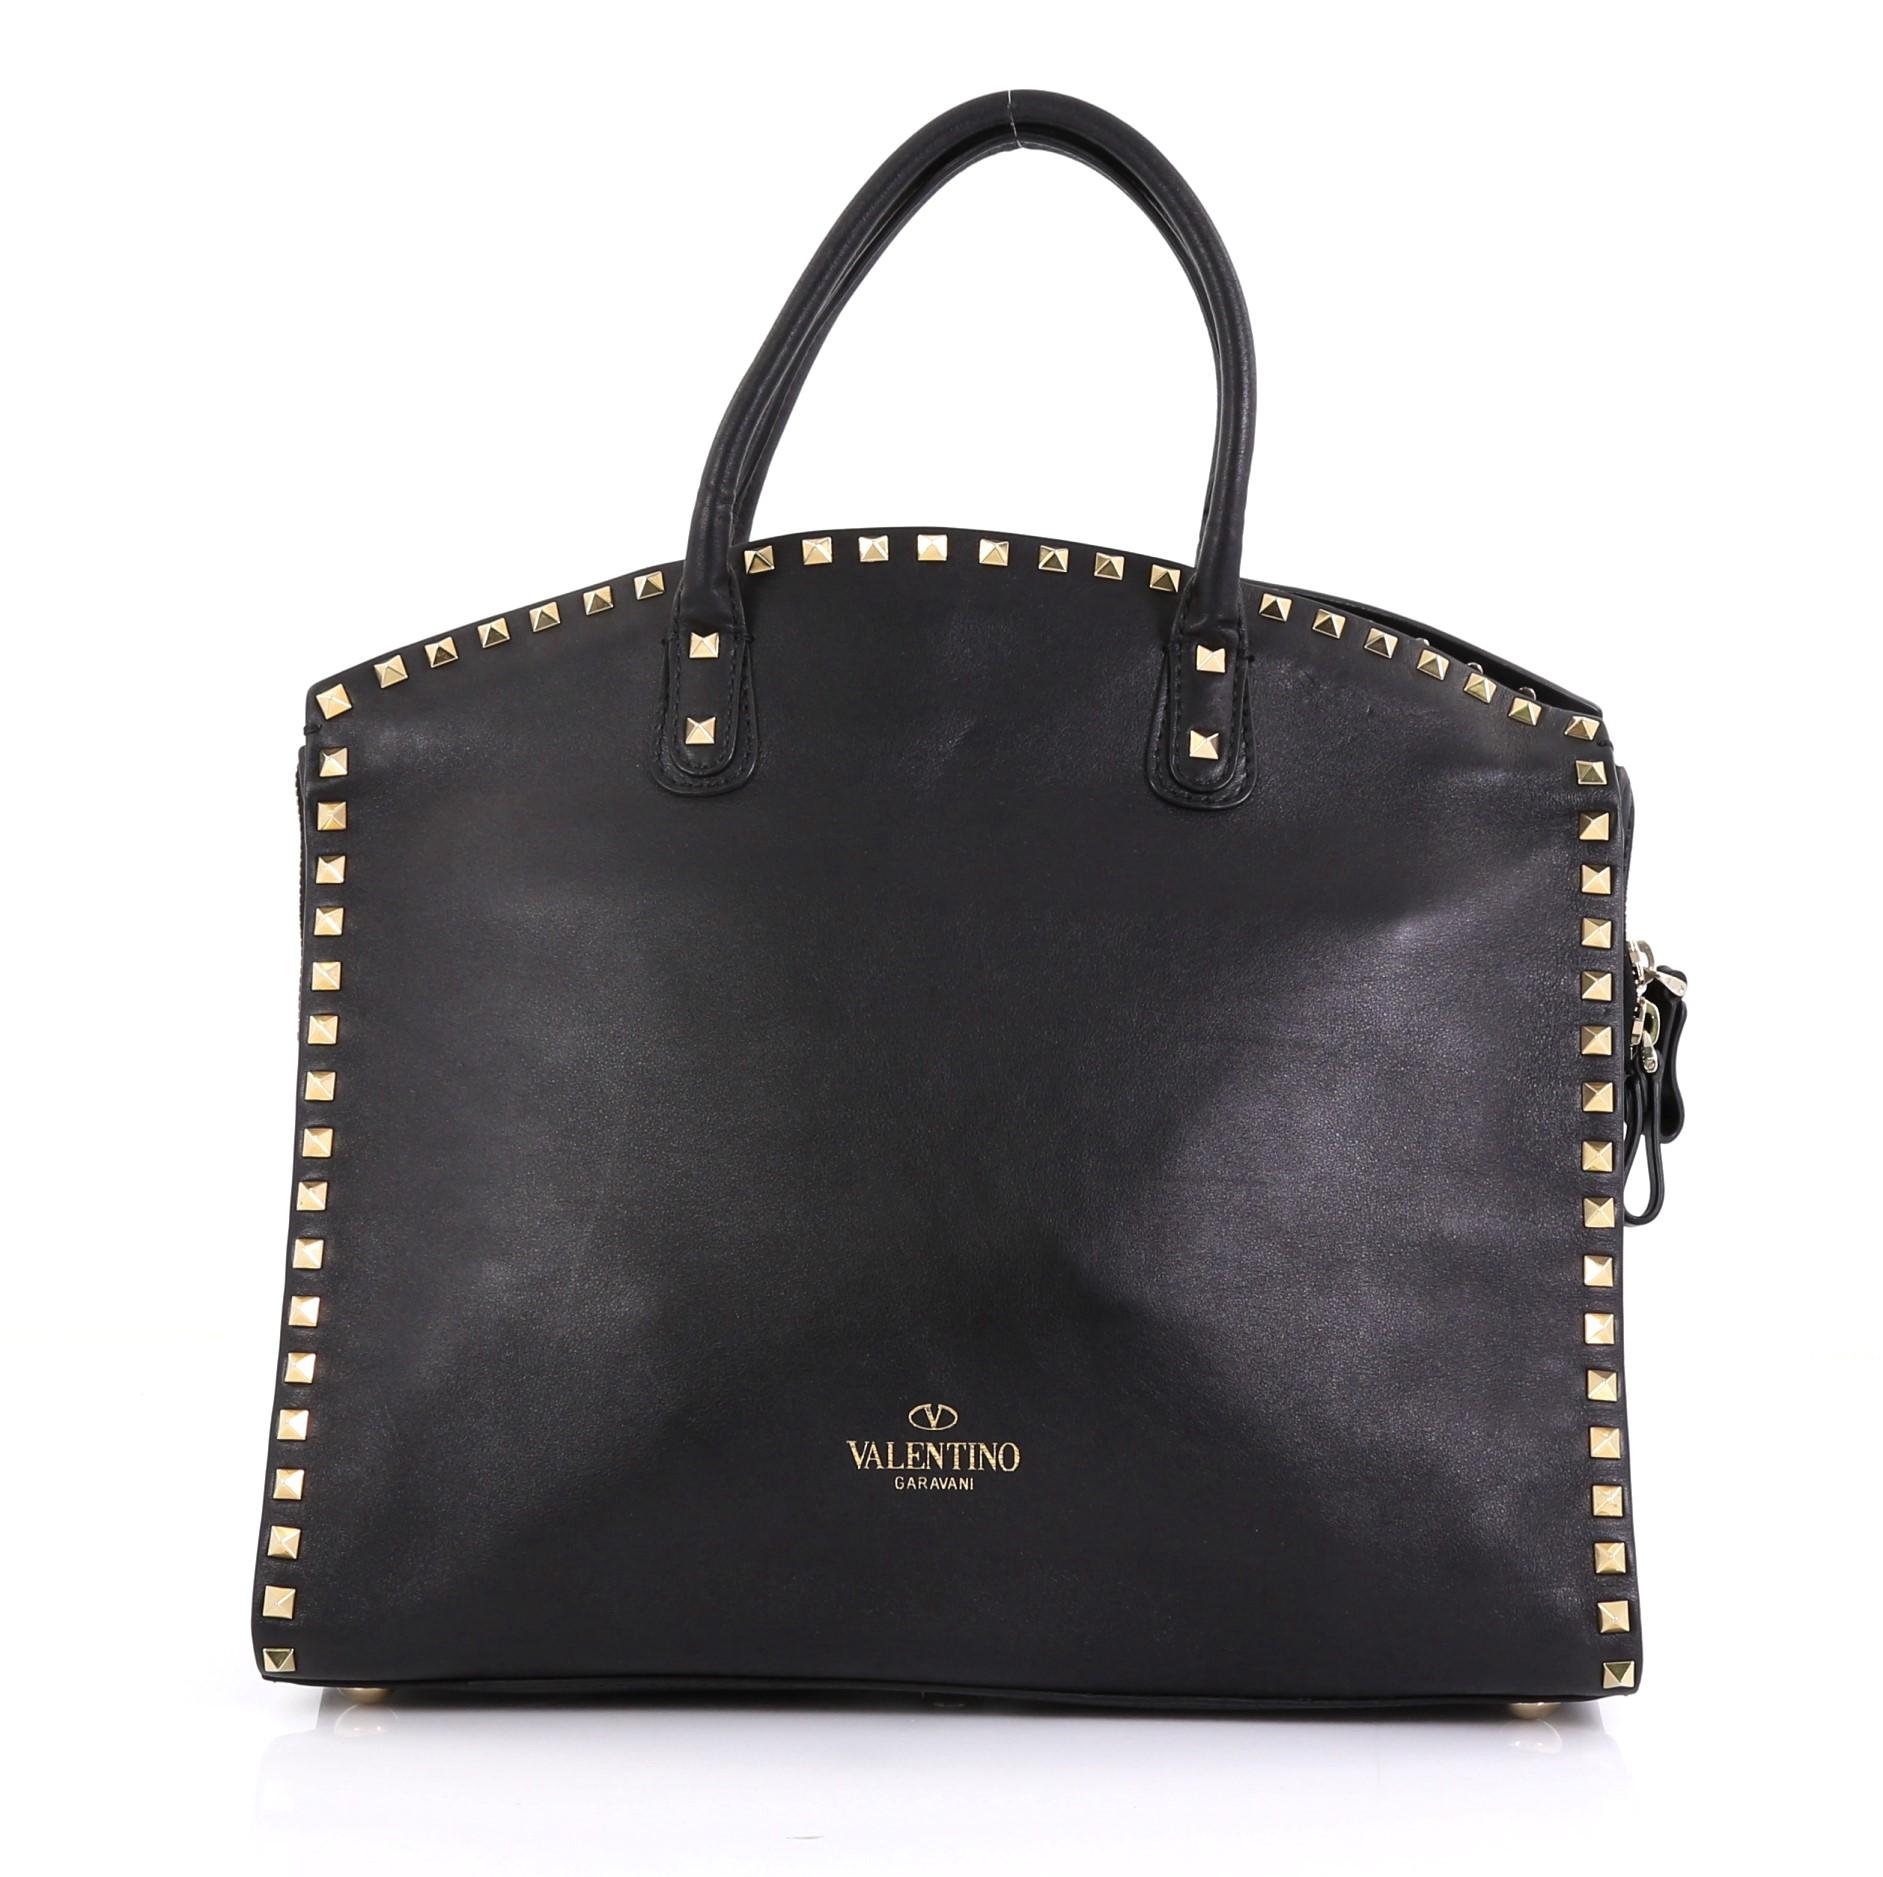 Black Valentino Rockstud Convertible Dome Tote Full Studded Leather